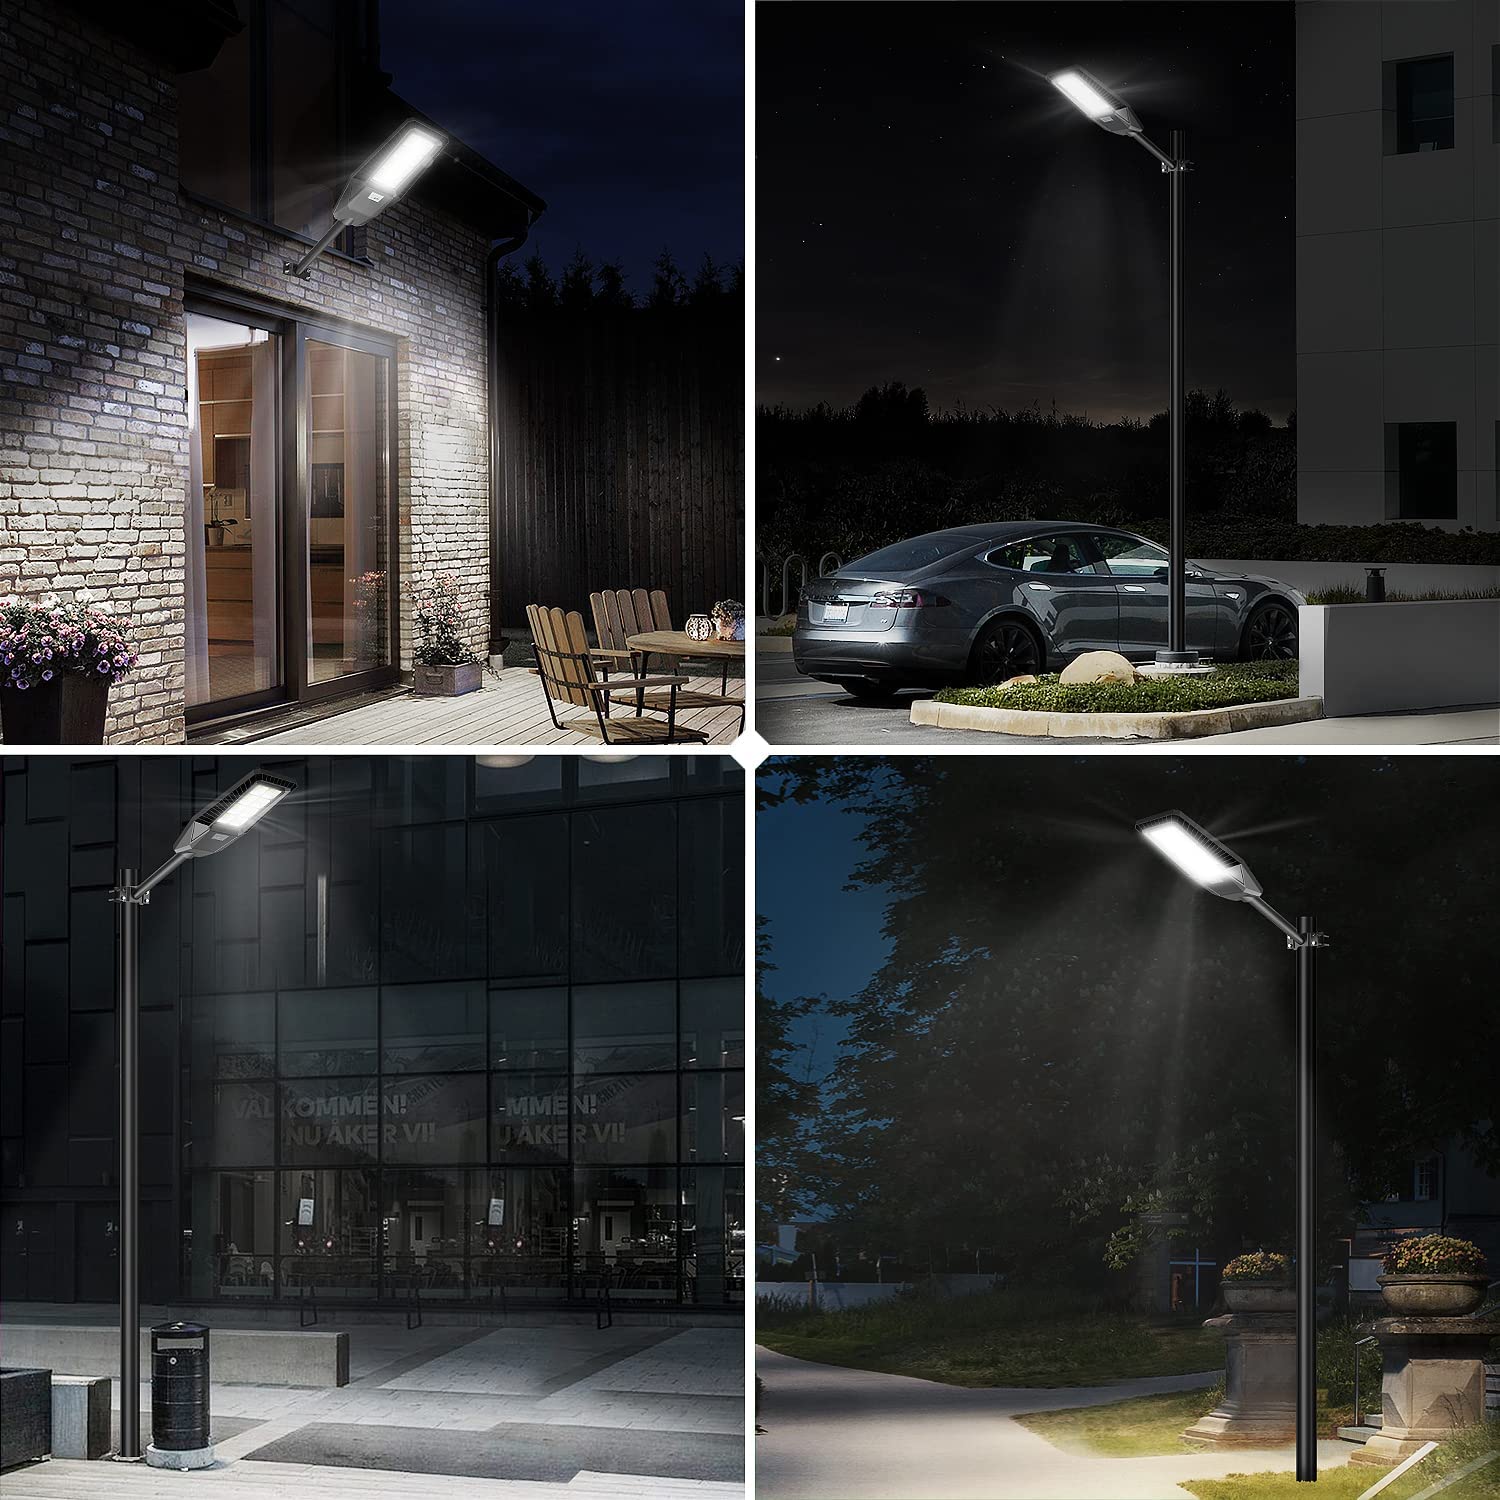 TENKOO 2 Pack TW Solar Street Light, 384 LEDs 8000LM Dusk to Dawn Outdoor Solar Powered Parking Lot Motion Sensor Waterproof IP66 Remote Control for Yard, Garden, Street, Basketball Court